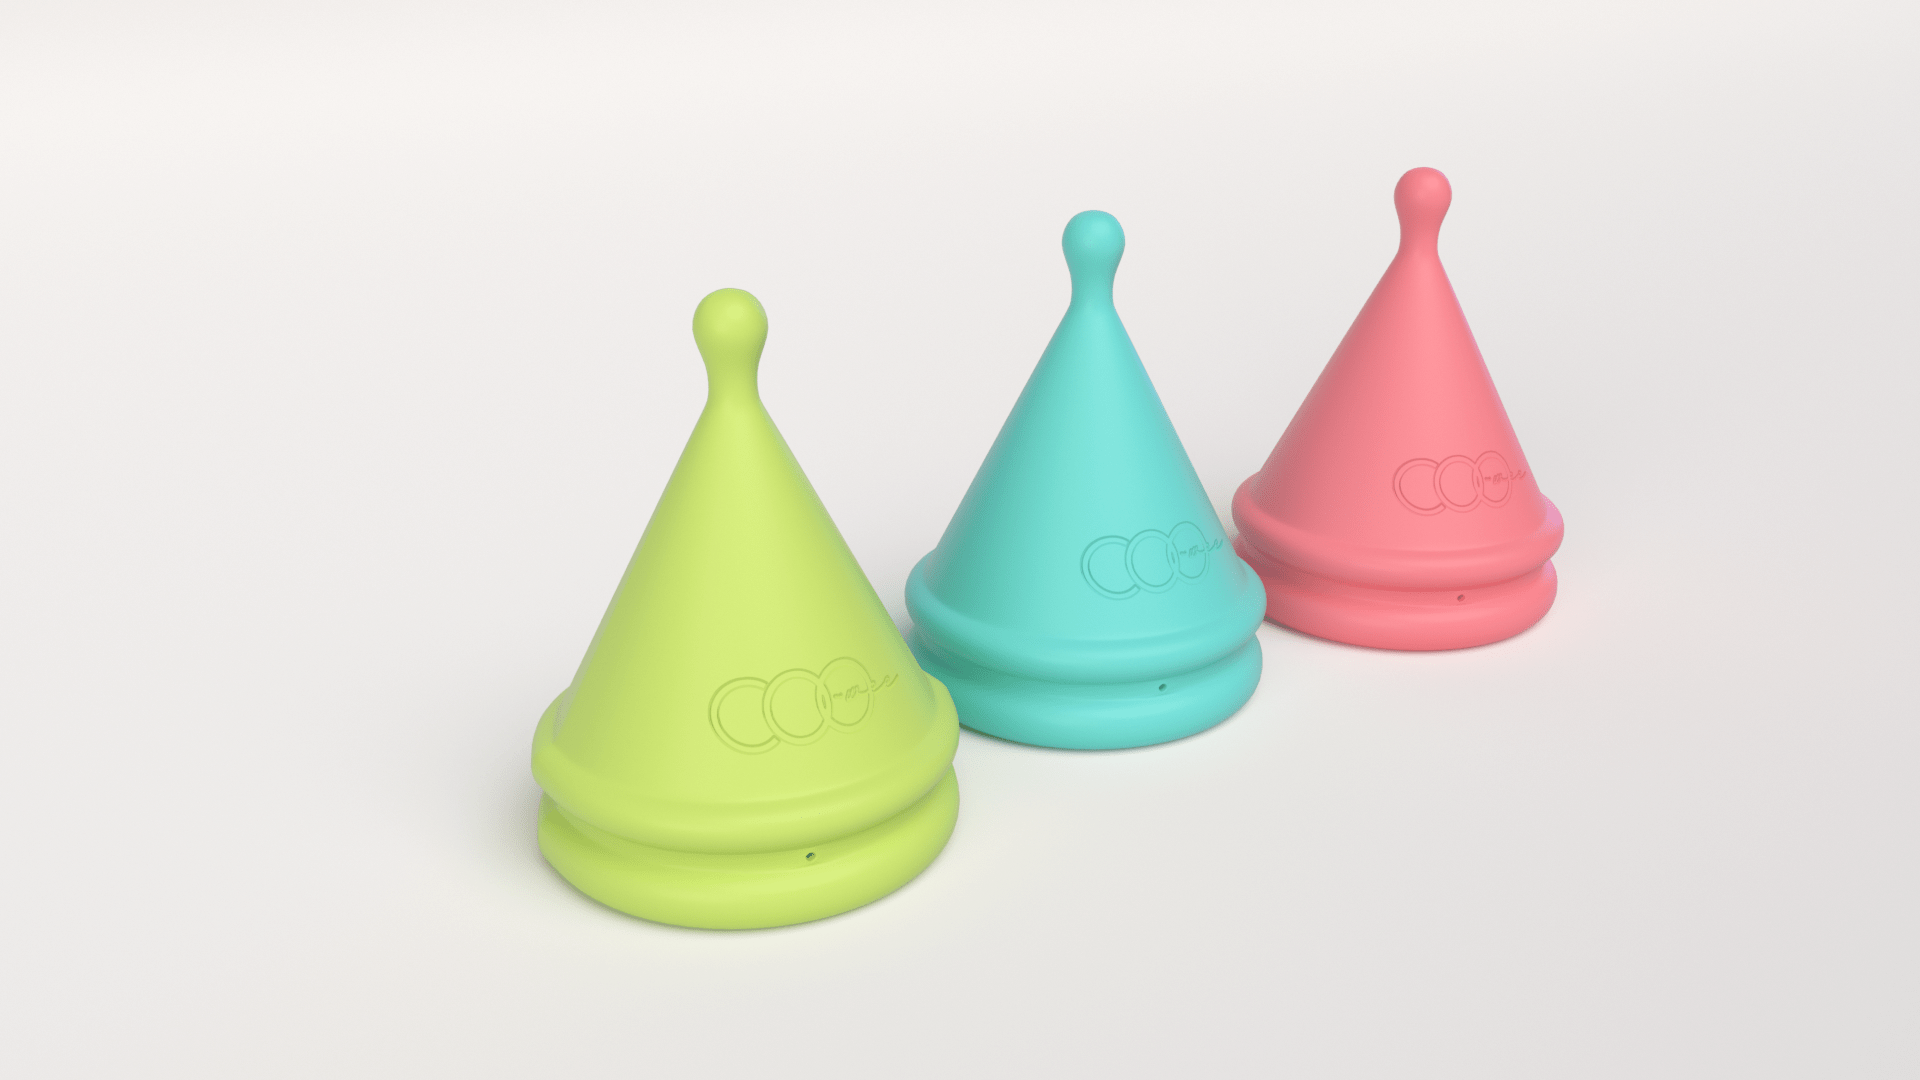 Coo Wee Incontinence Cups helps you save money as they are reusable and is made from premium Medical Grade Silicone